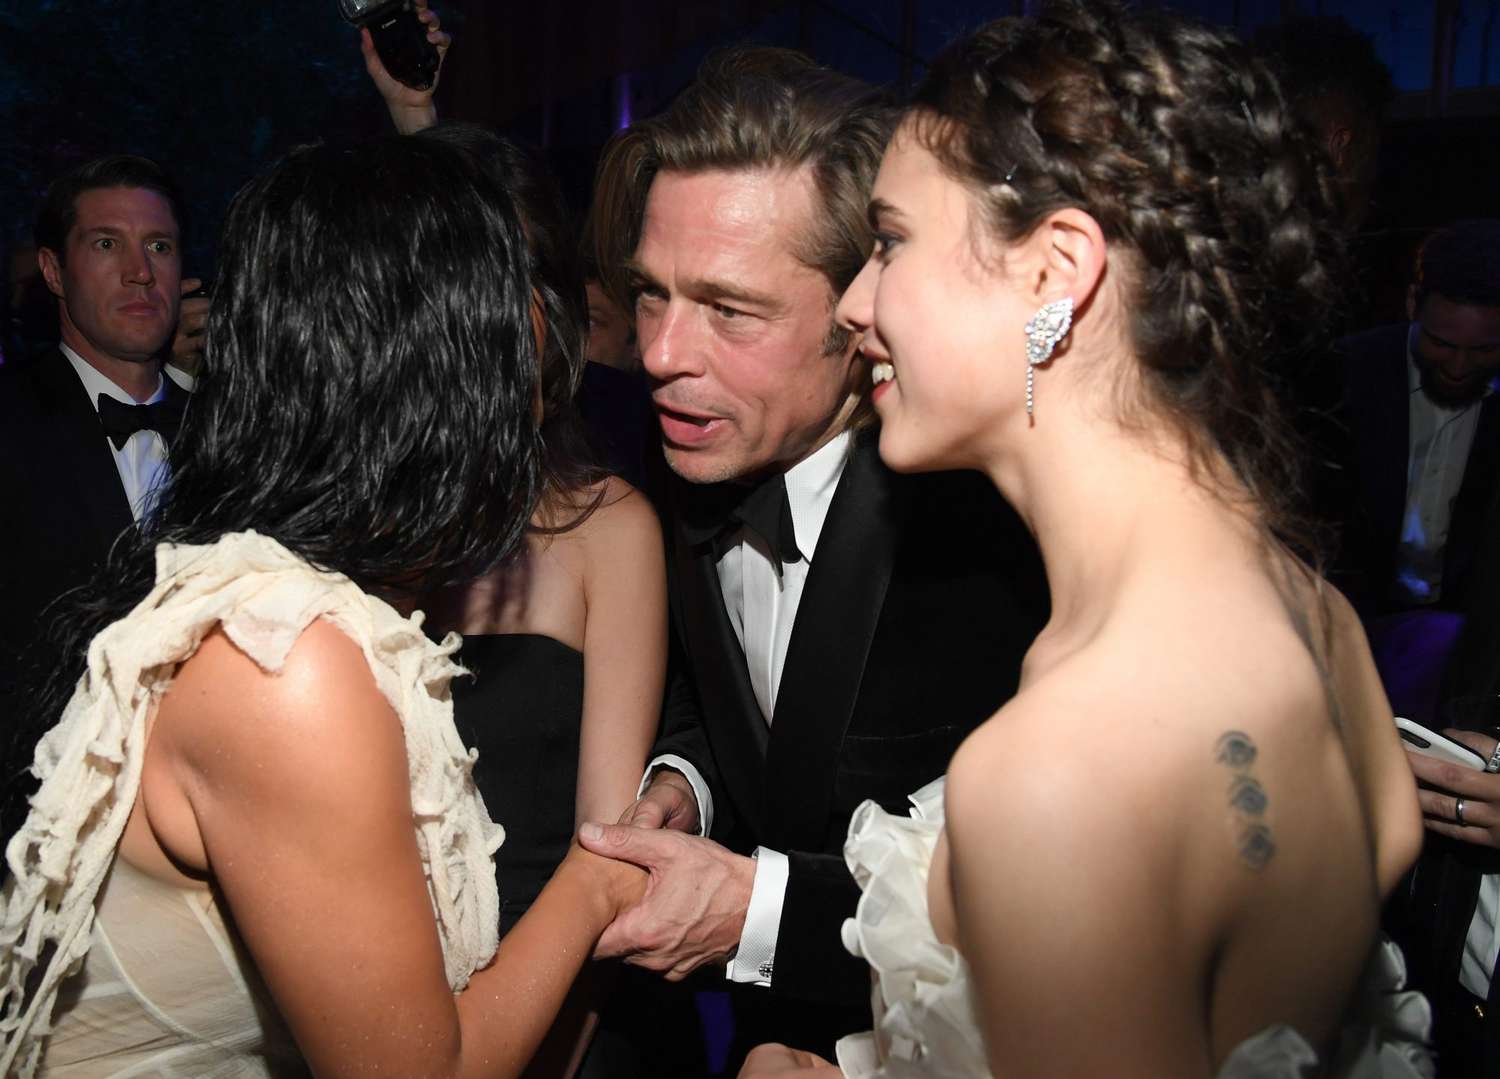 <p>Do we think Brad Pitt (at the Vanity Fair party) is begging Kim Kardashian for Keeping Up with the Kardashian next-season spoilers?</p>
                            